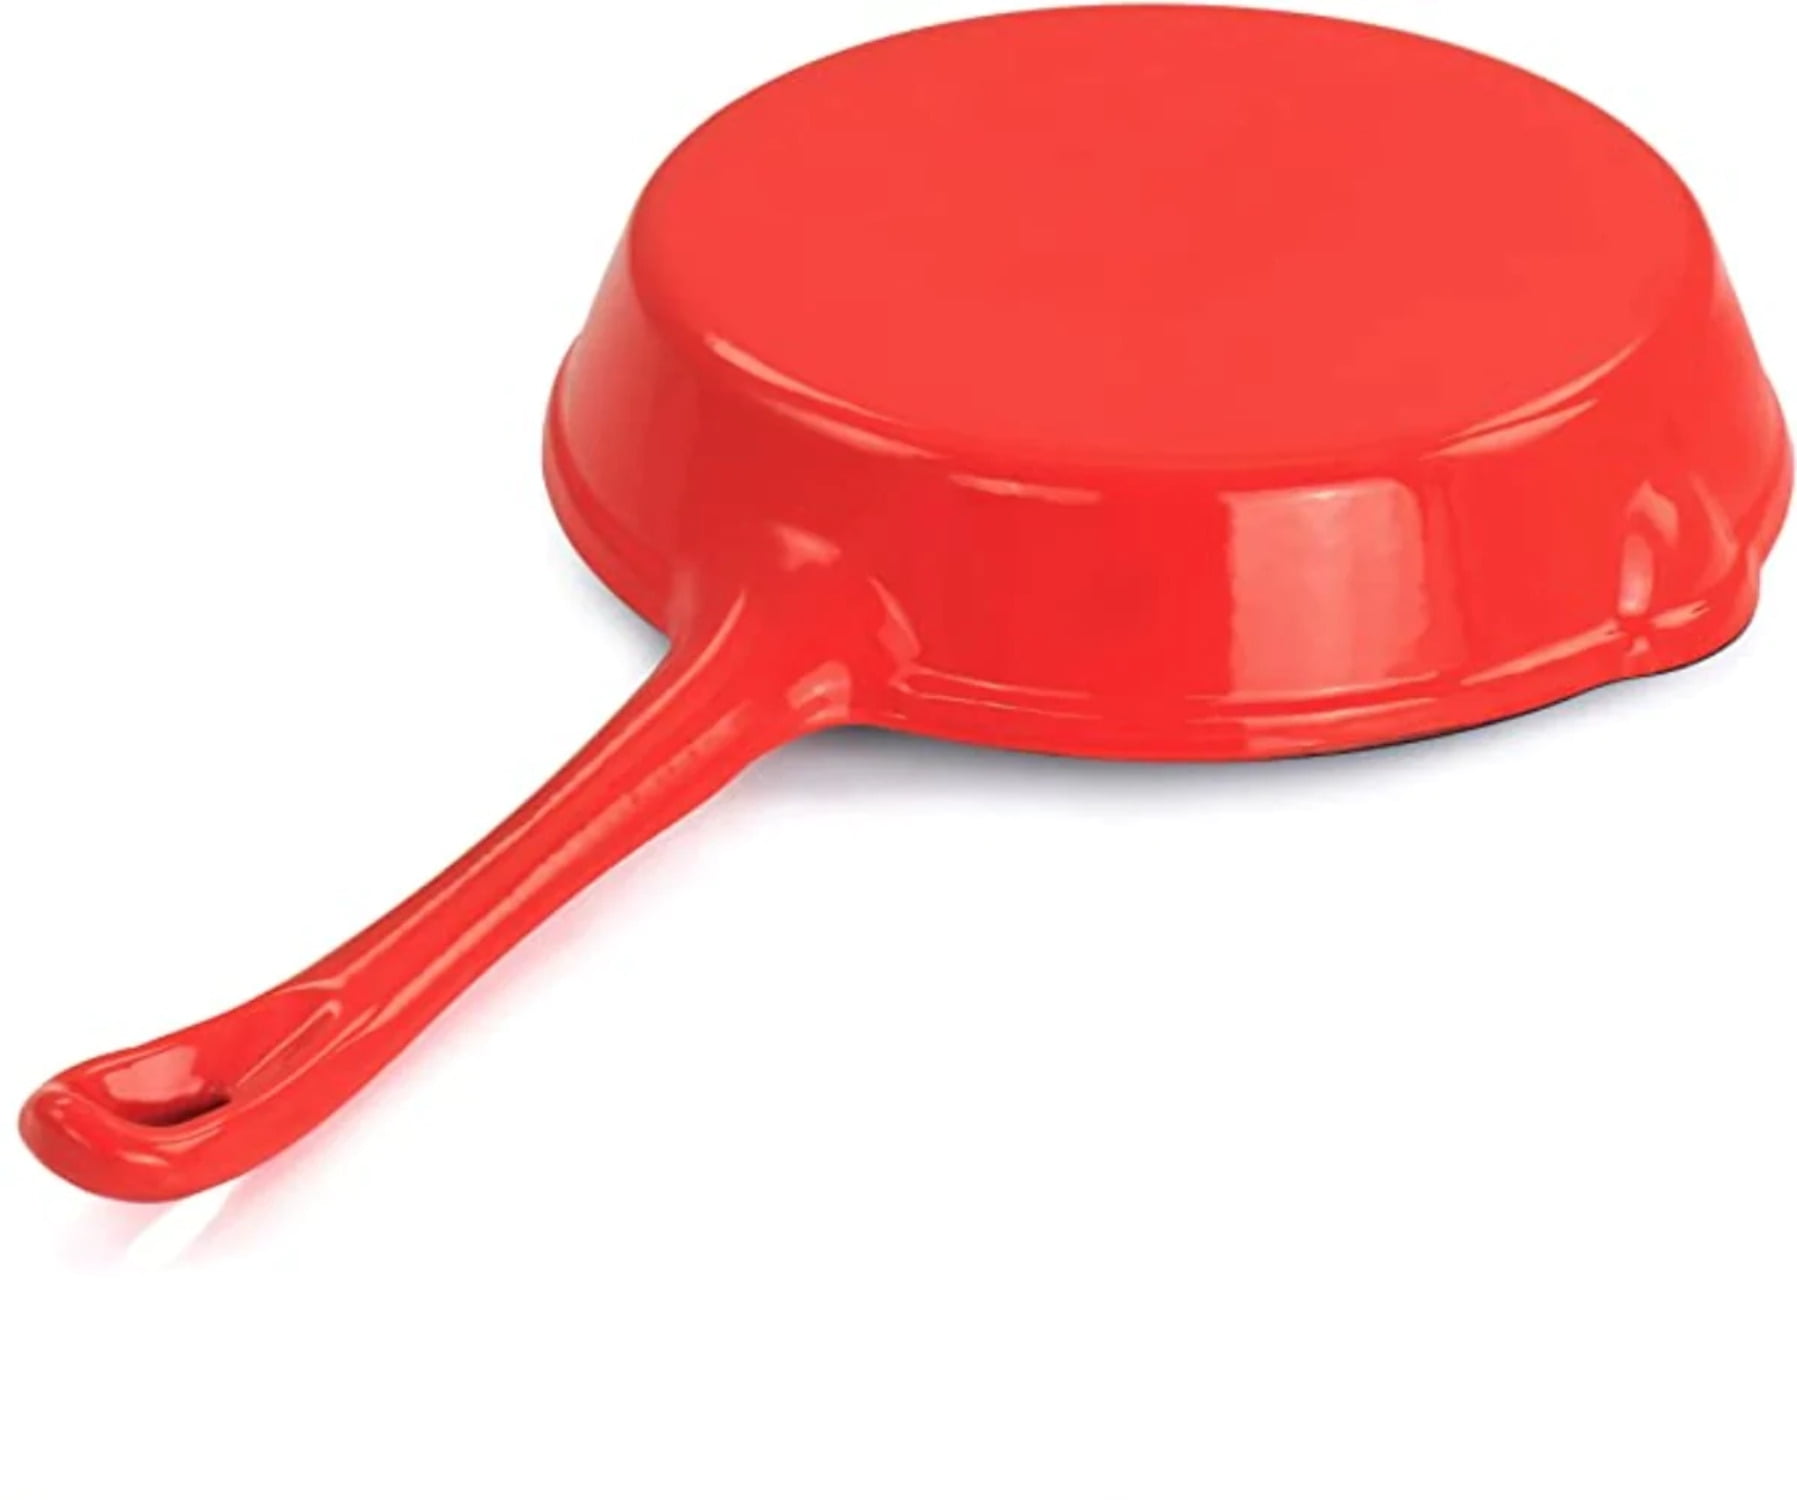 MegaChef 14 Inch Square Enamel Cast Iron Grill Pan in Red with Press -  9456170